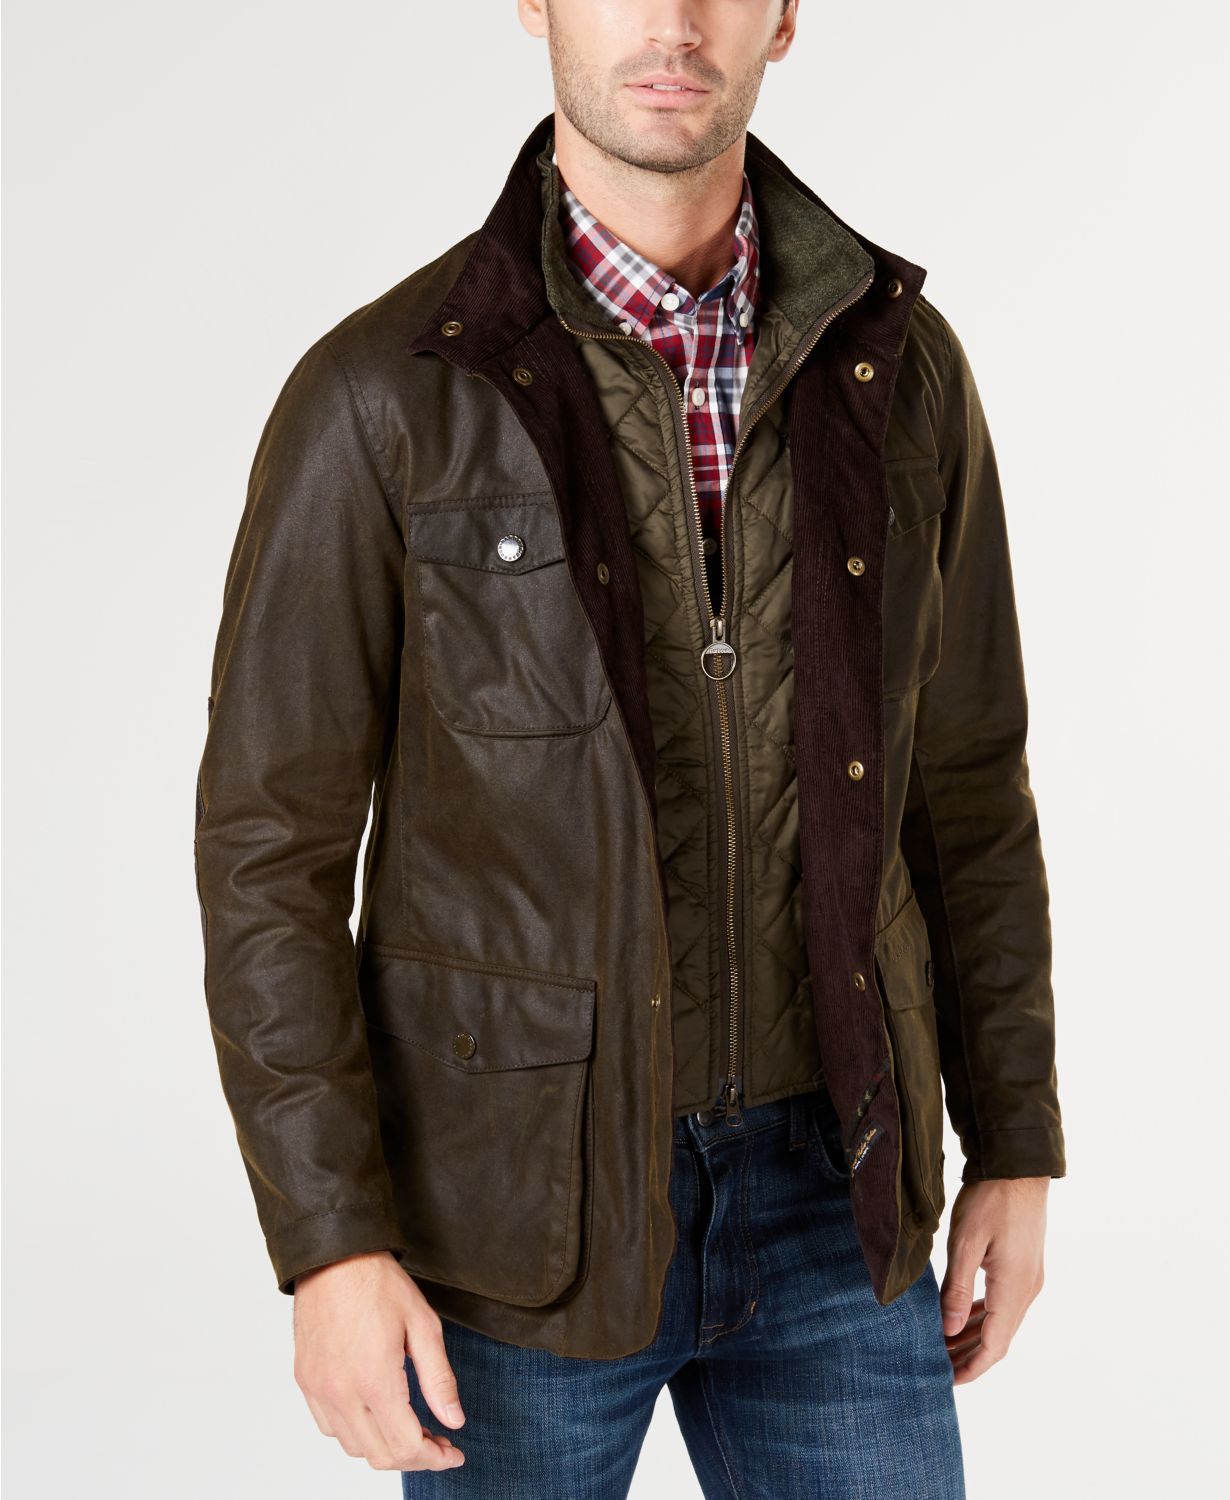 Barbour Jackets Are On Sale at Macy's 